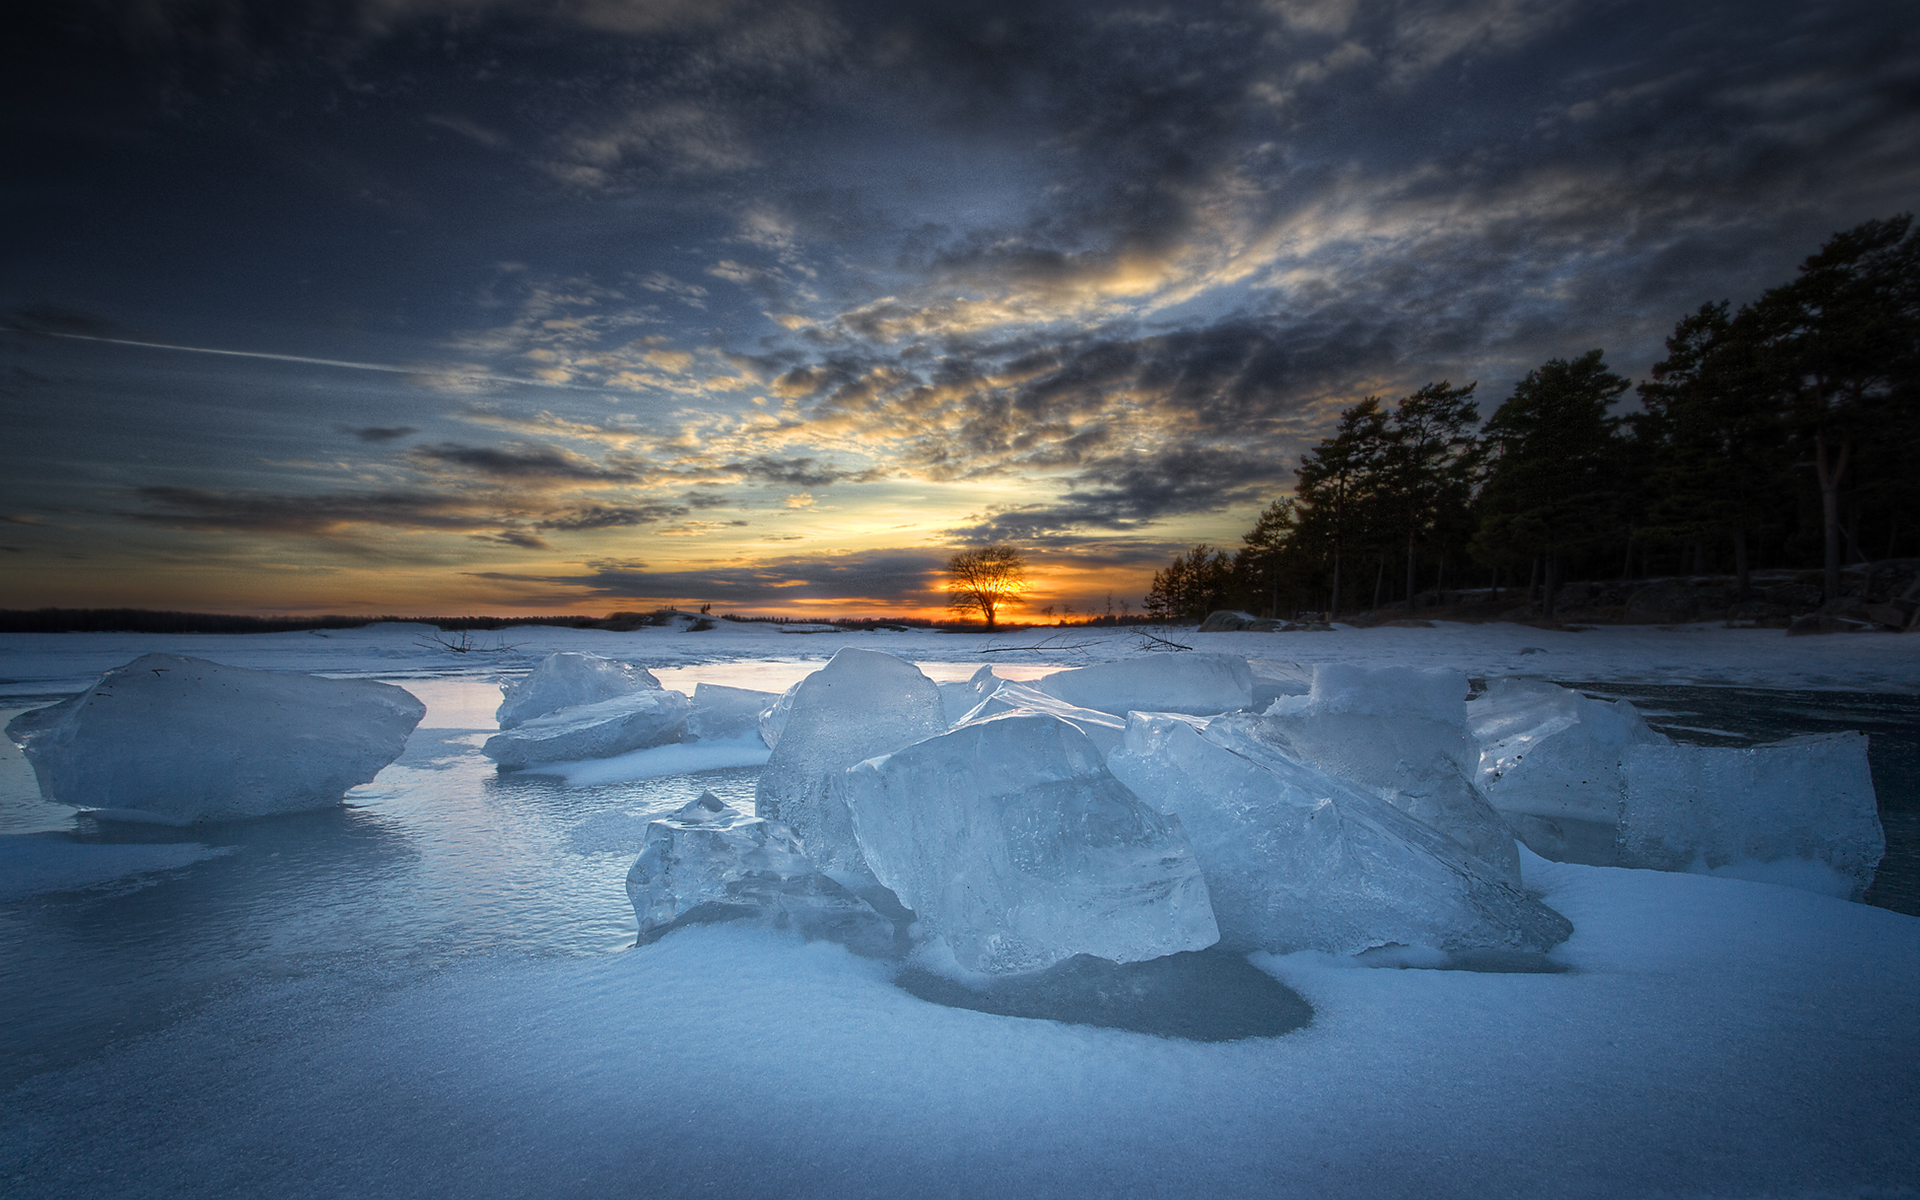 ice, Sunset, Winter, Lakes, Water, Sky, Clouds, Shore, Reflection Wallpaper